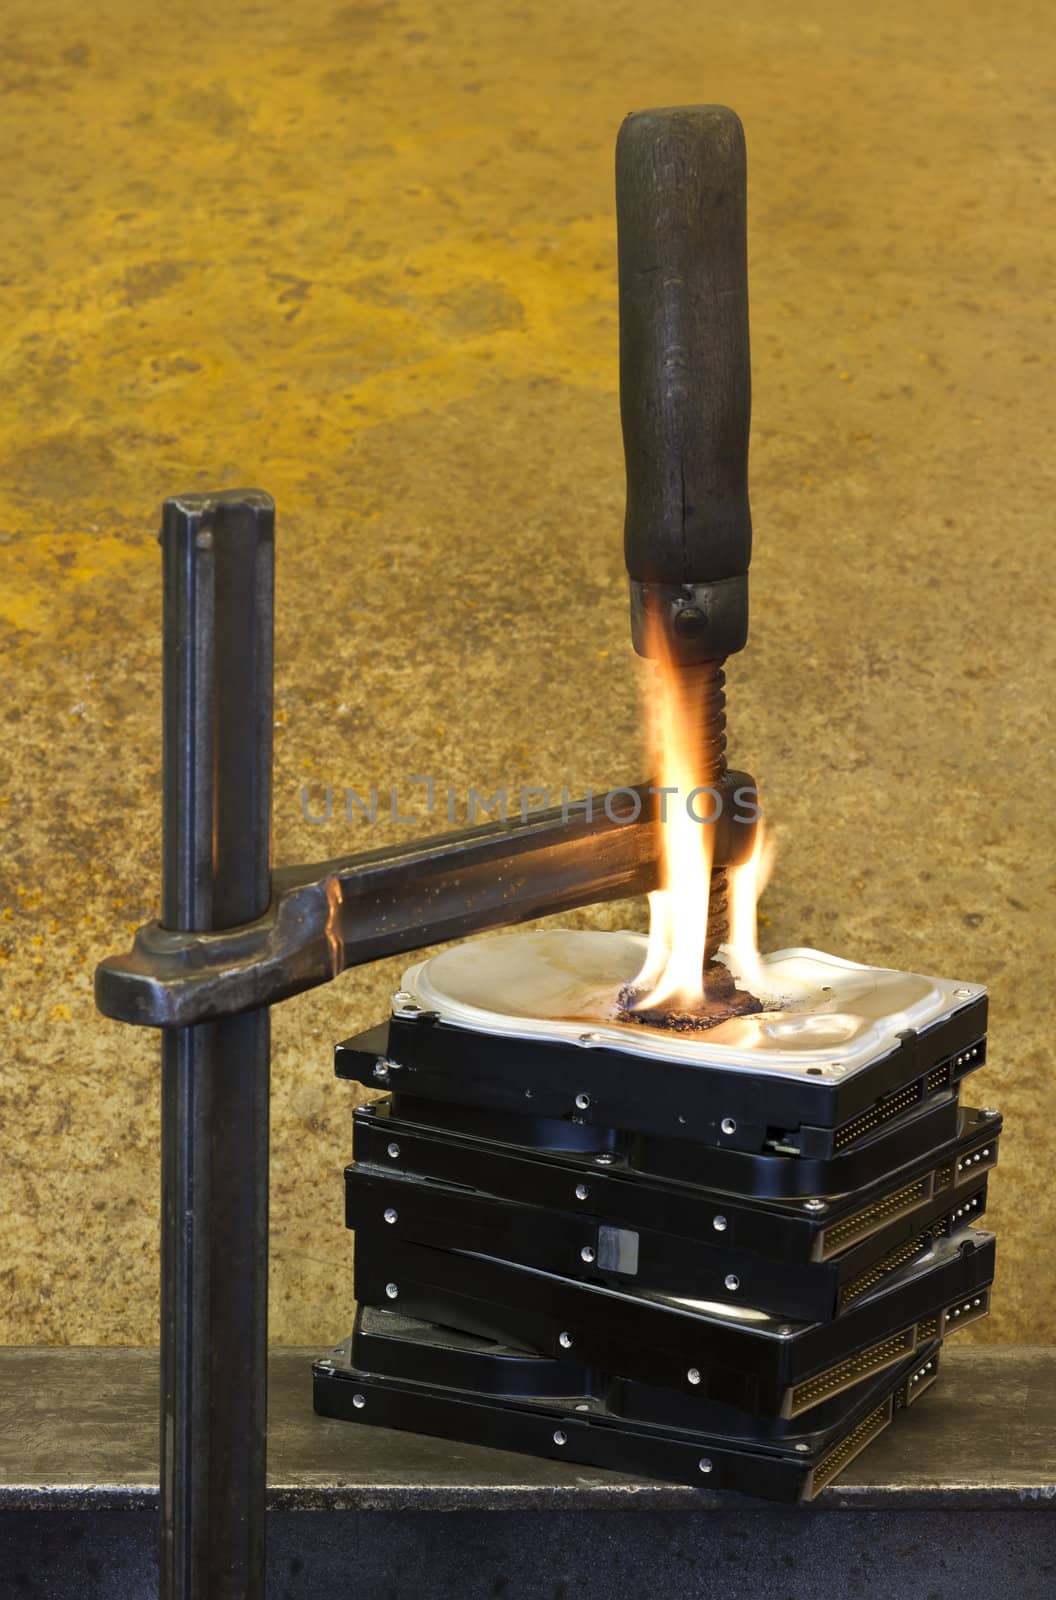 clamp pressing on burning stack of hard drives in rusty background